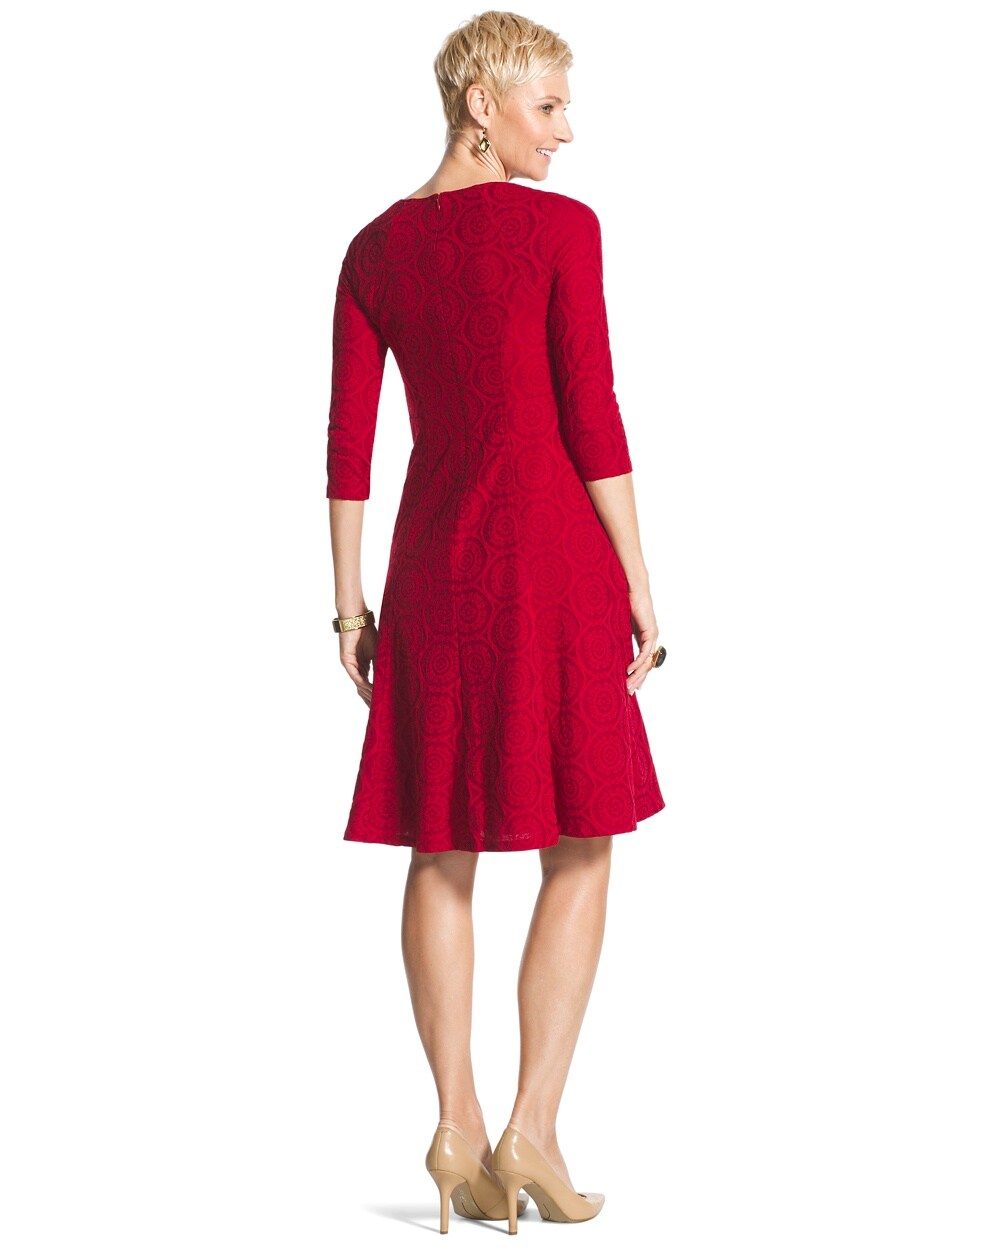 Medallion Red Dress - Chicos